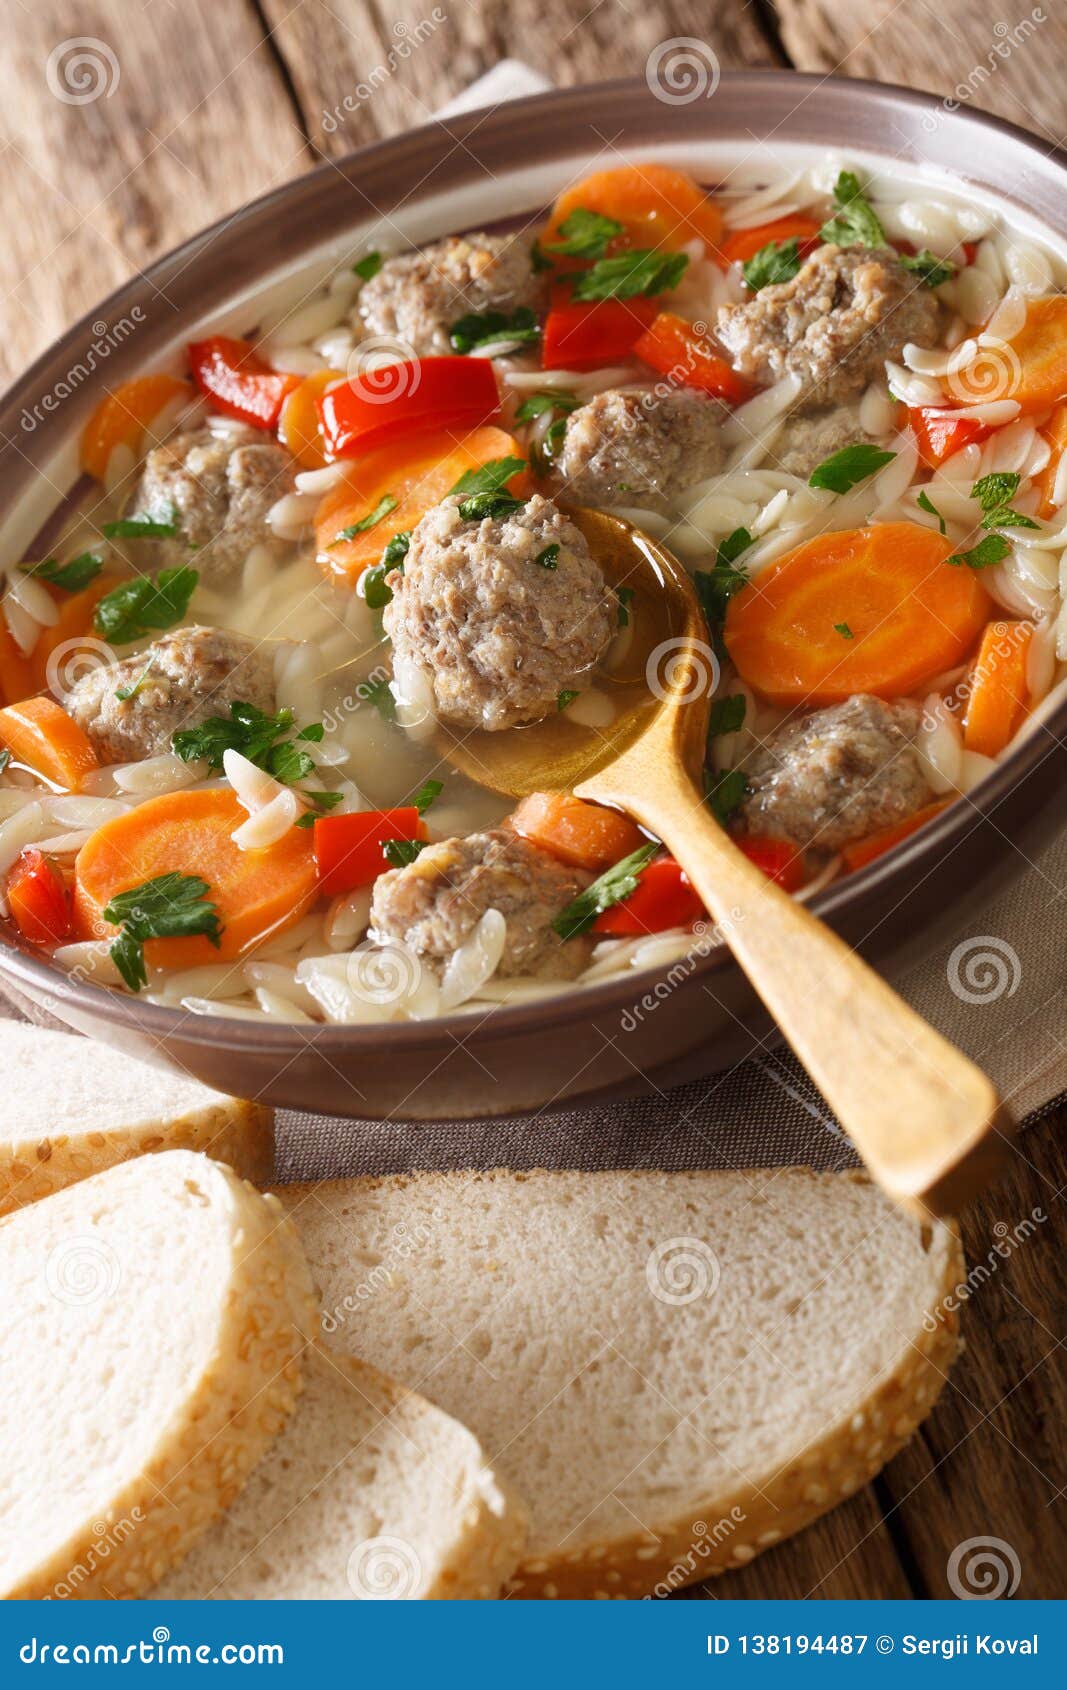 Italian Wedding Soup with Orzo Pasta, Meatballs and Vegetables Close-up ...